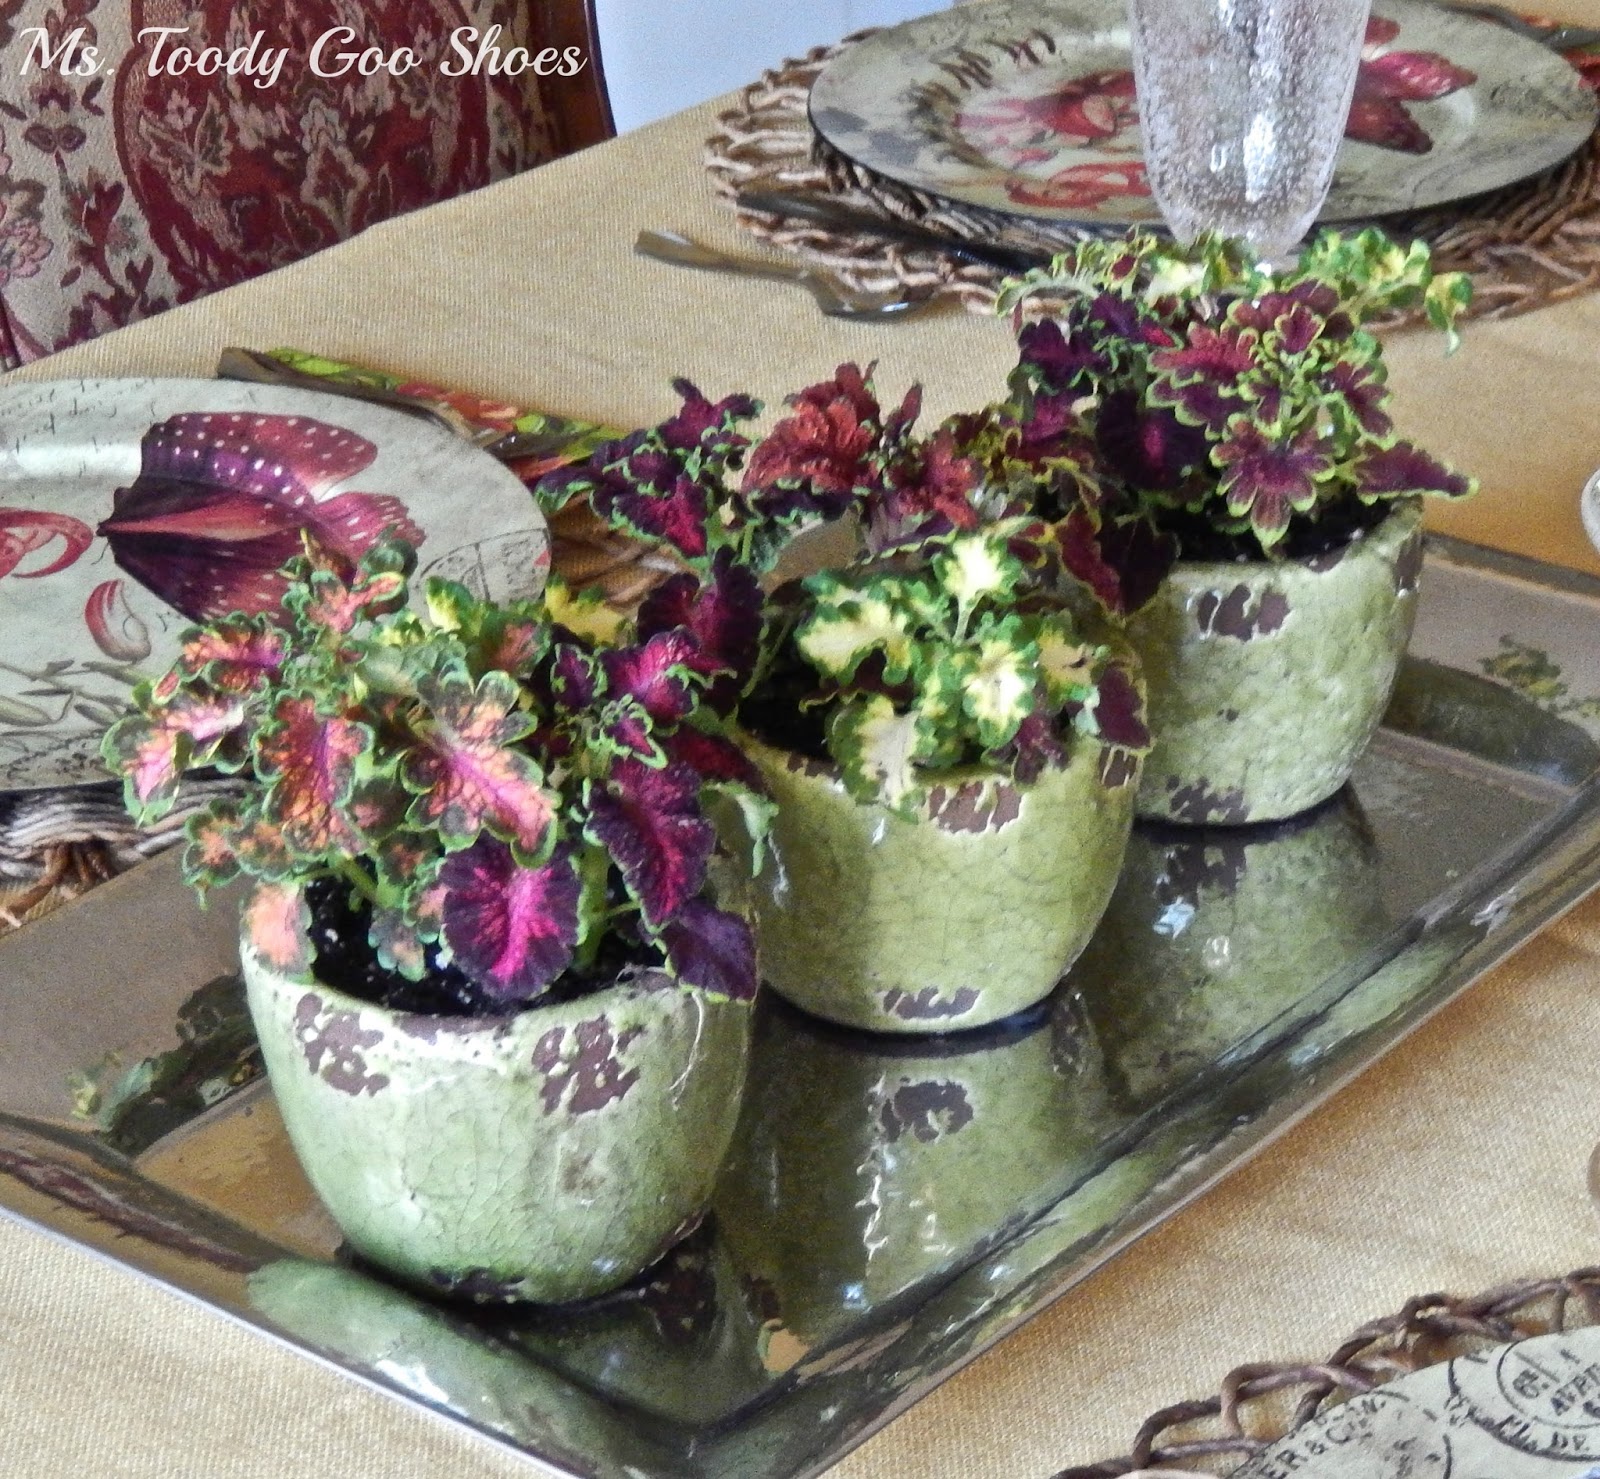 Cheap and Cheerful Flower Pot Centerpiece --- Ms. Toody Goo Shoes